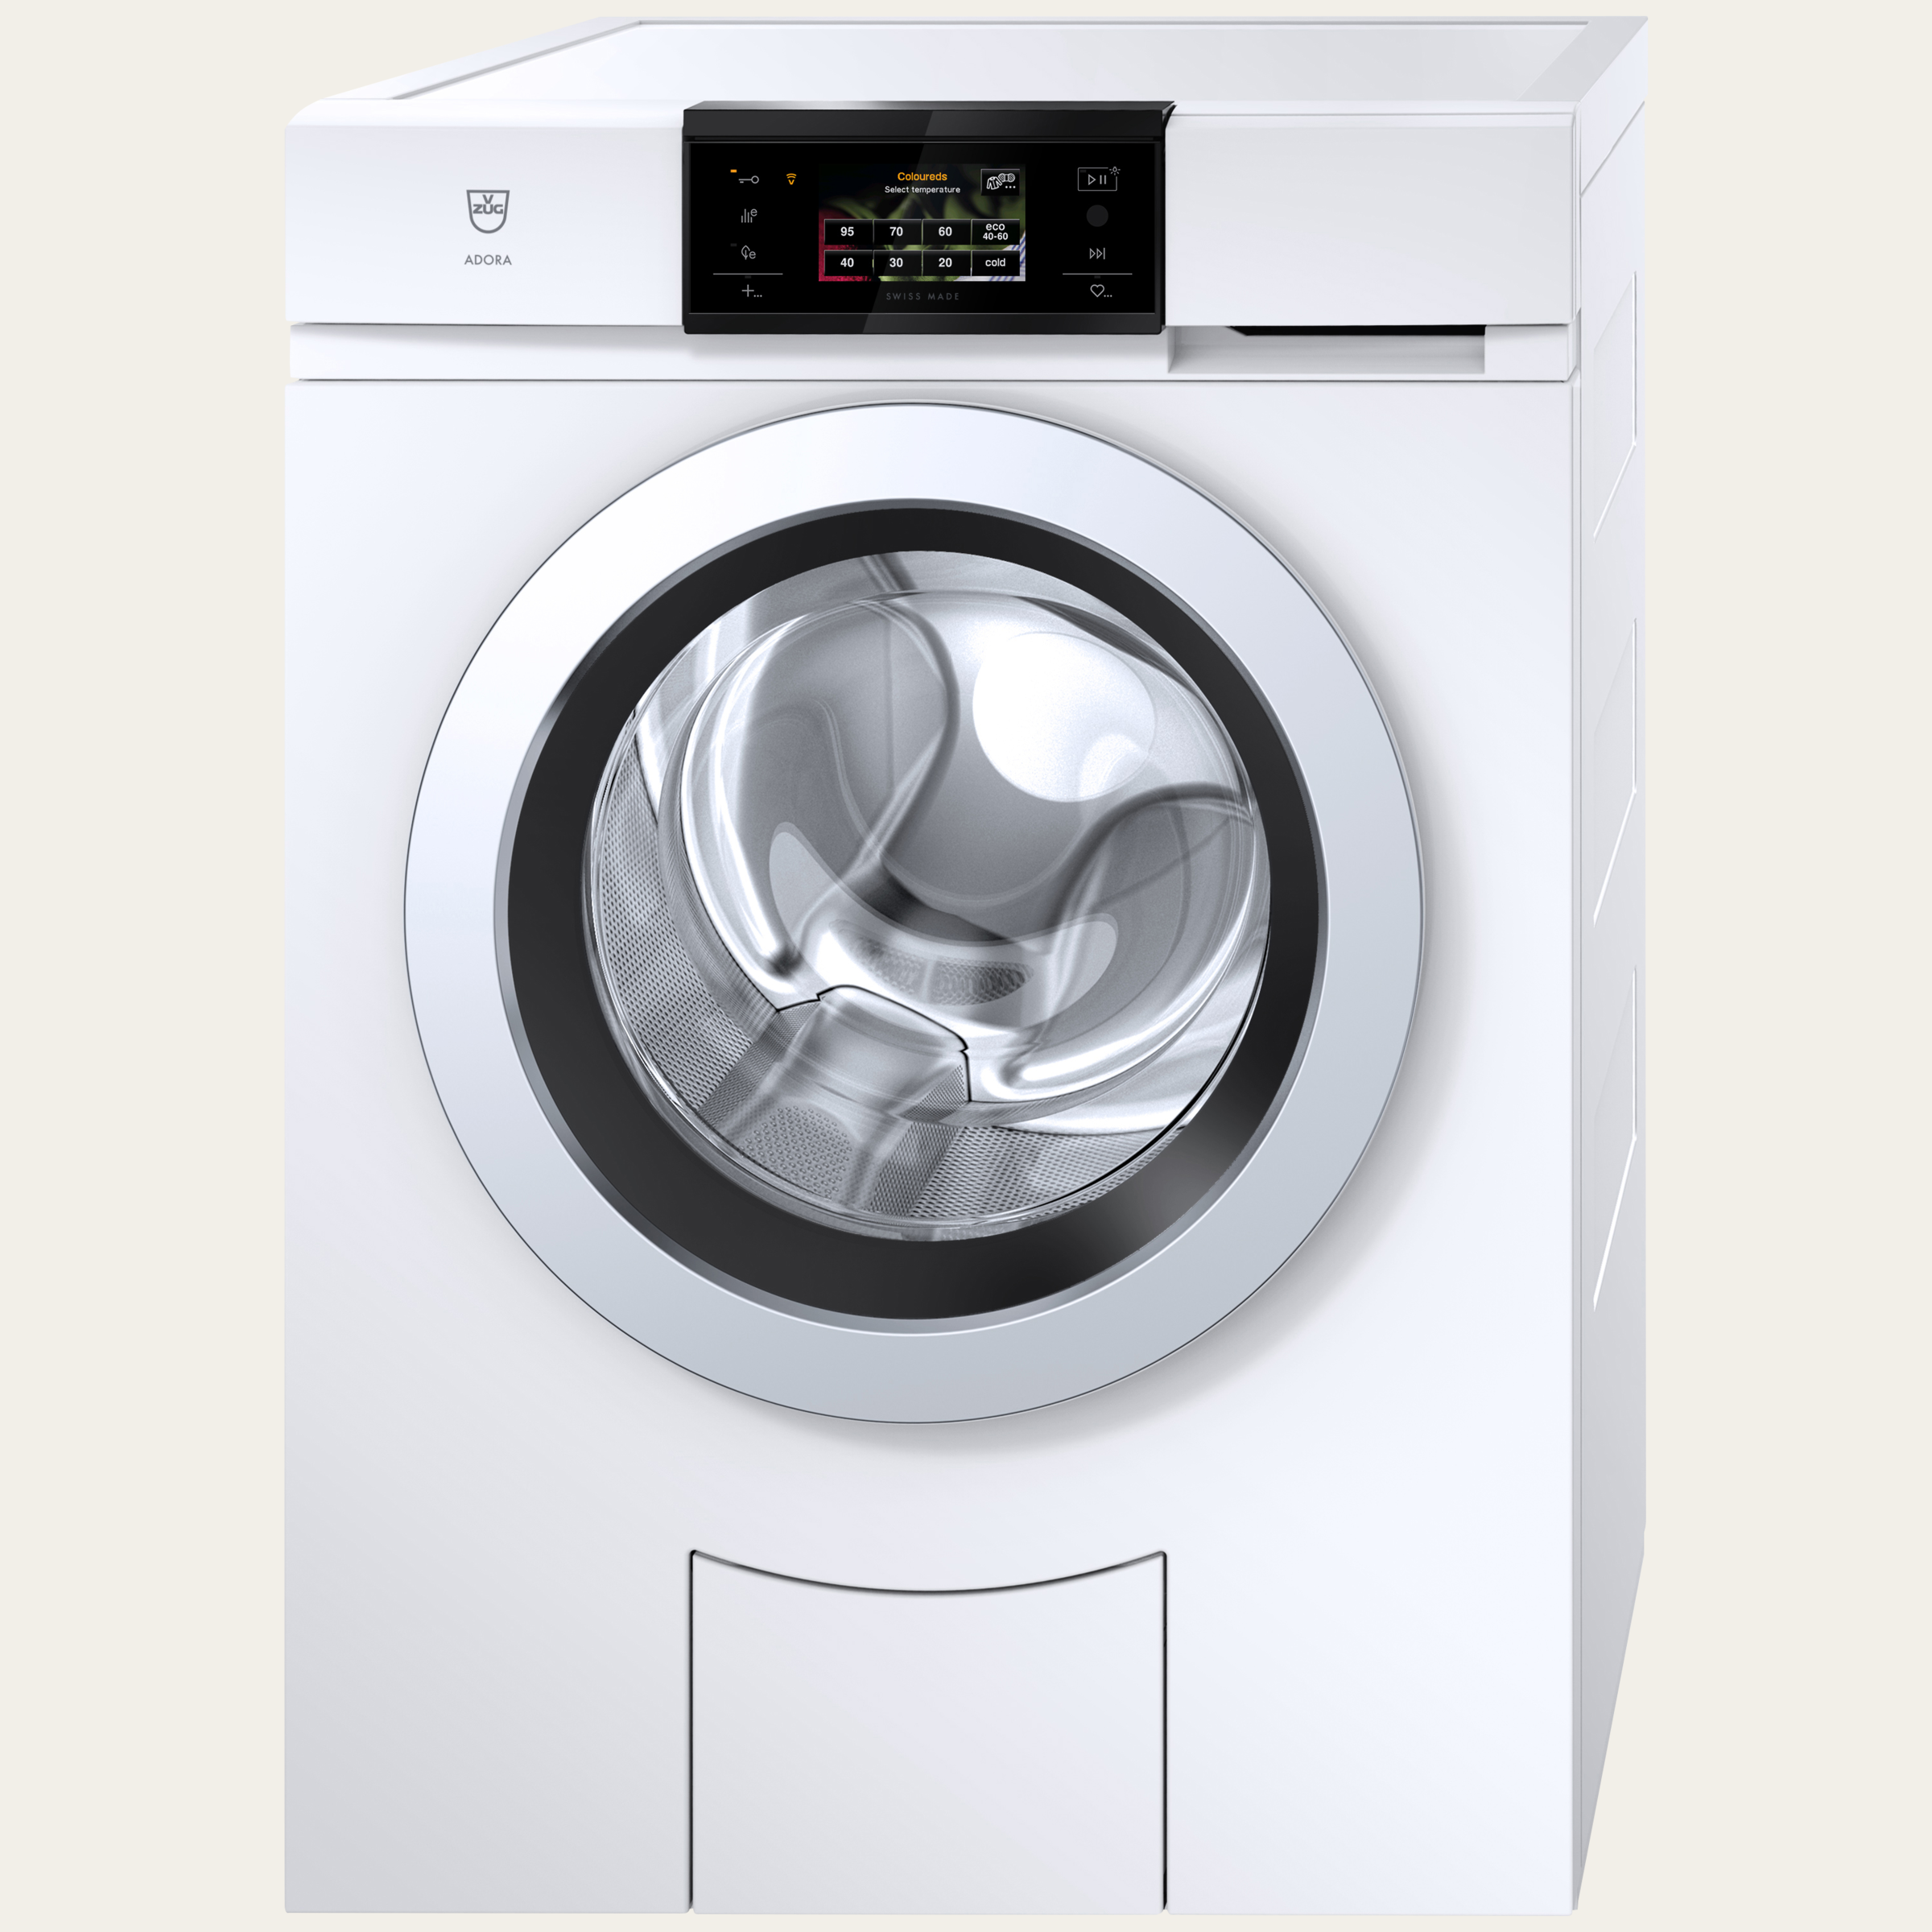 V-ZUG Washing machine AdoraWash V6000, Door hinge: Right, V-ZUG-Home, Door design: Stainless steel, Full-colour graphic display, touchscreen, Nominal capacity: 8 kg